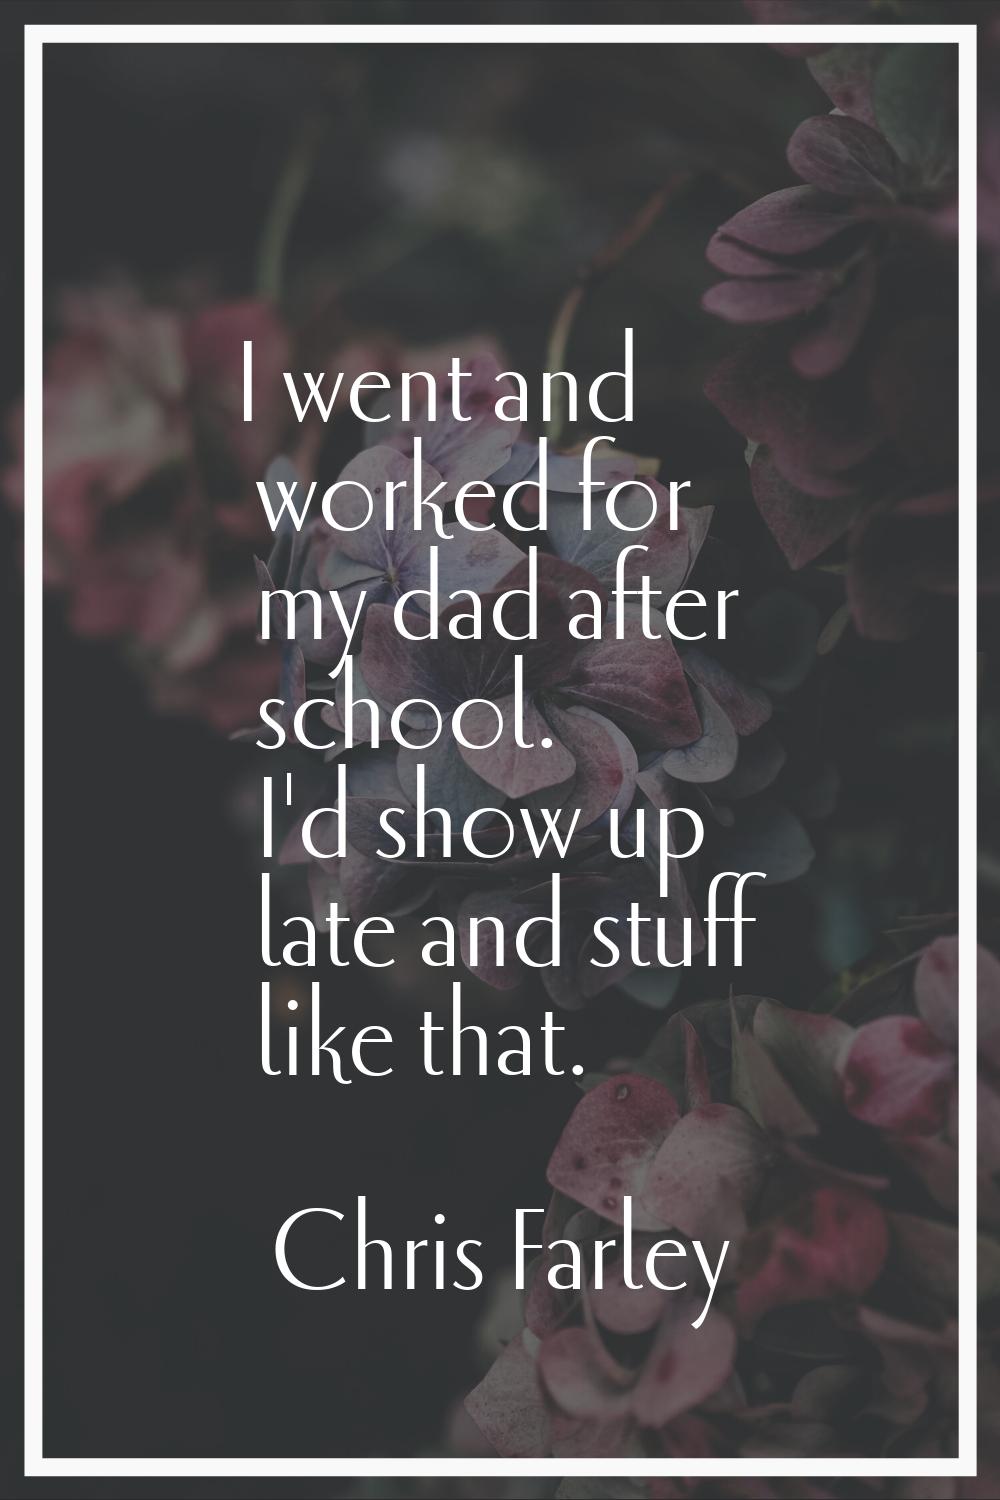 I went and worked for my dad after school. I'd show up late and stuff like that.